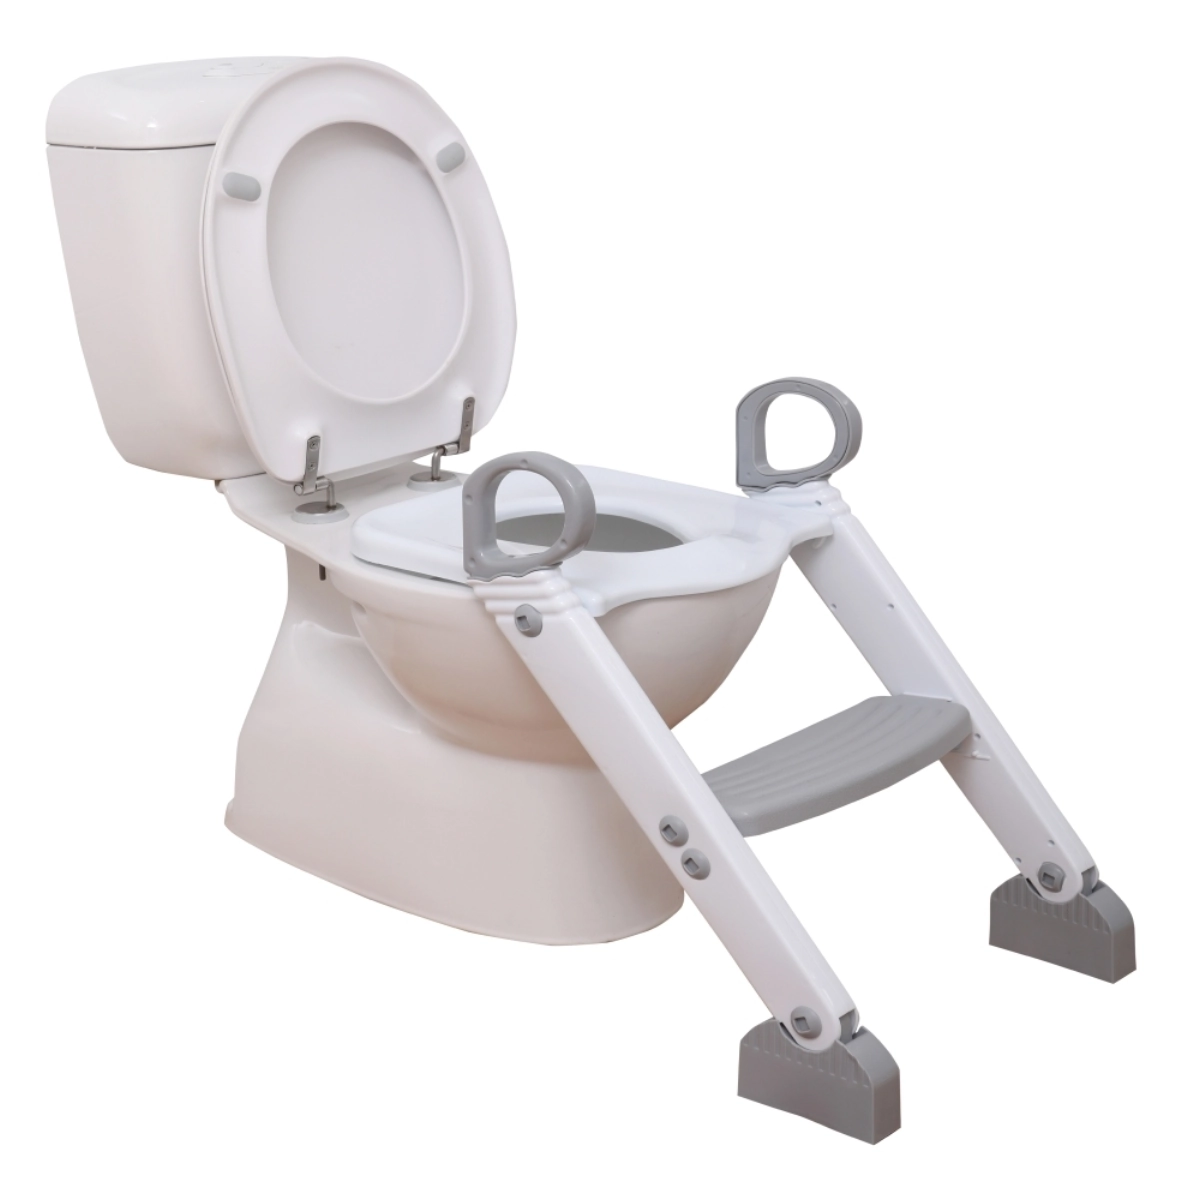 Image of Dreambaby Step-up Toilet Trainer-Grey/White (2021)